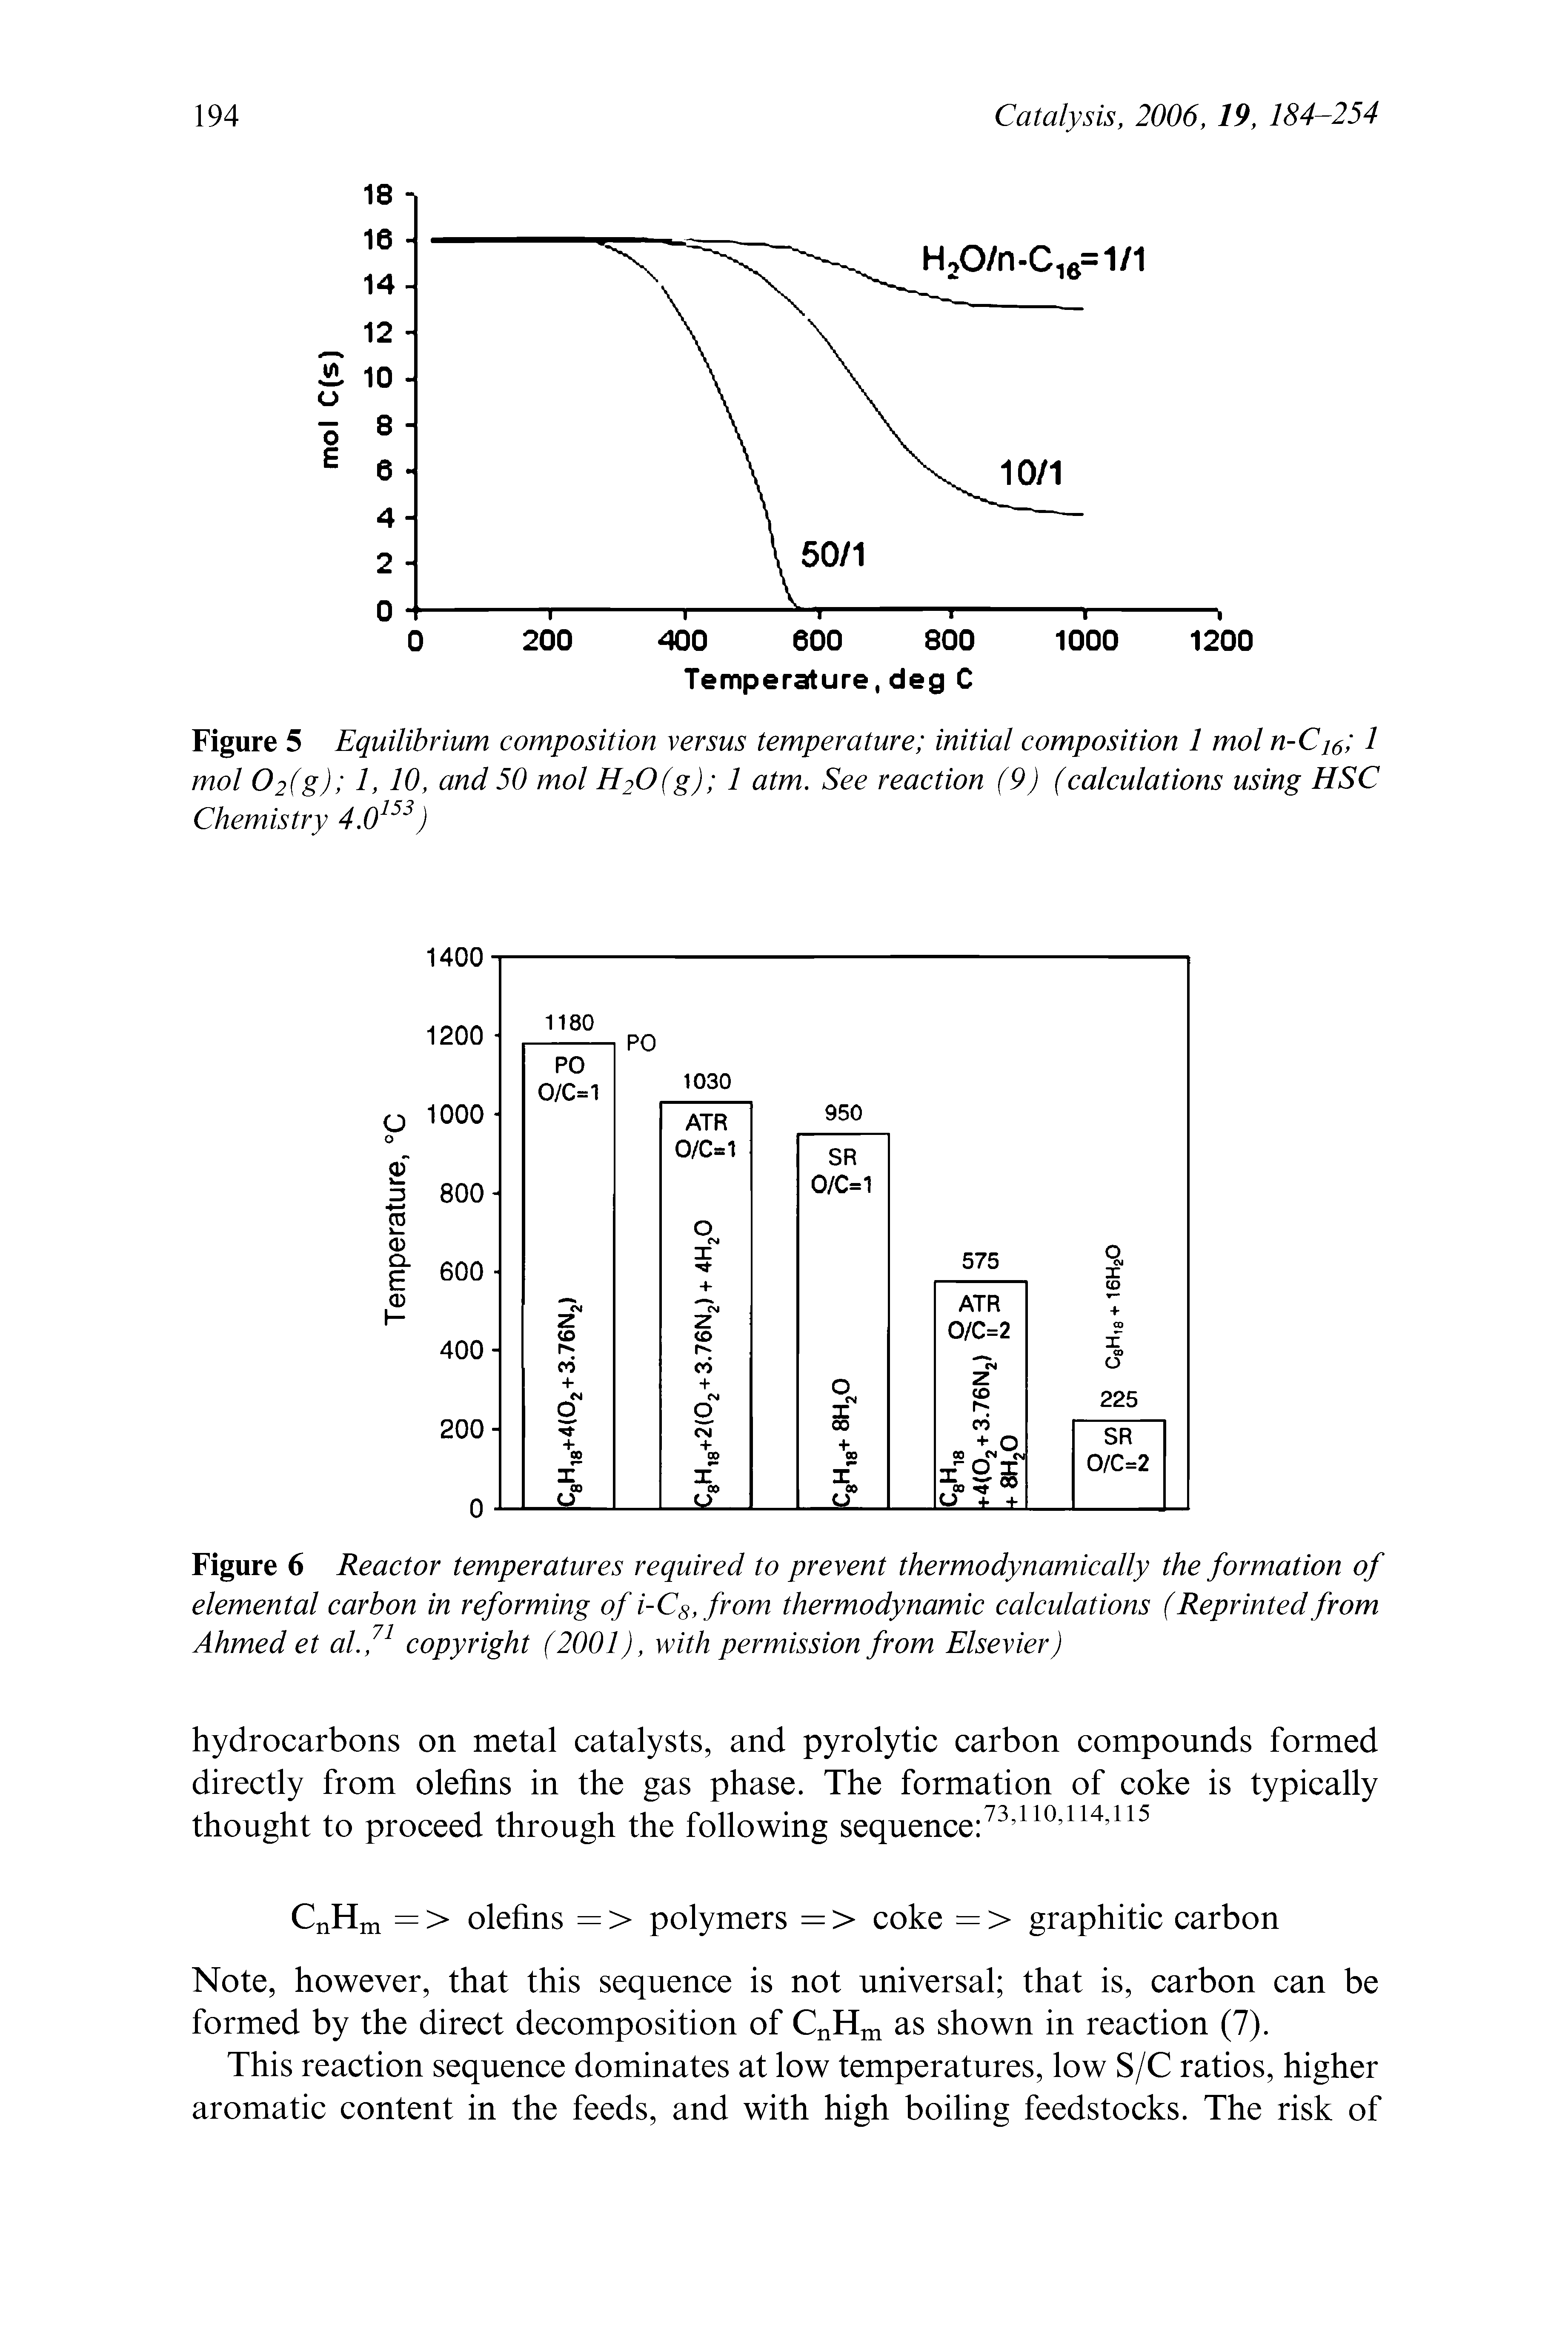 Figure 6 Reactor temperatures required to prevent thermodynamically the formation of elemental carbon in reforming of i-Cs,from thermodynamic calculations (Reprinted from Ahmed et al.f copyright (2001), with permission from Elsevier)...